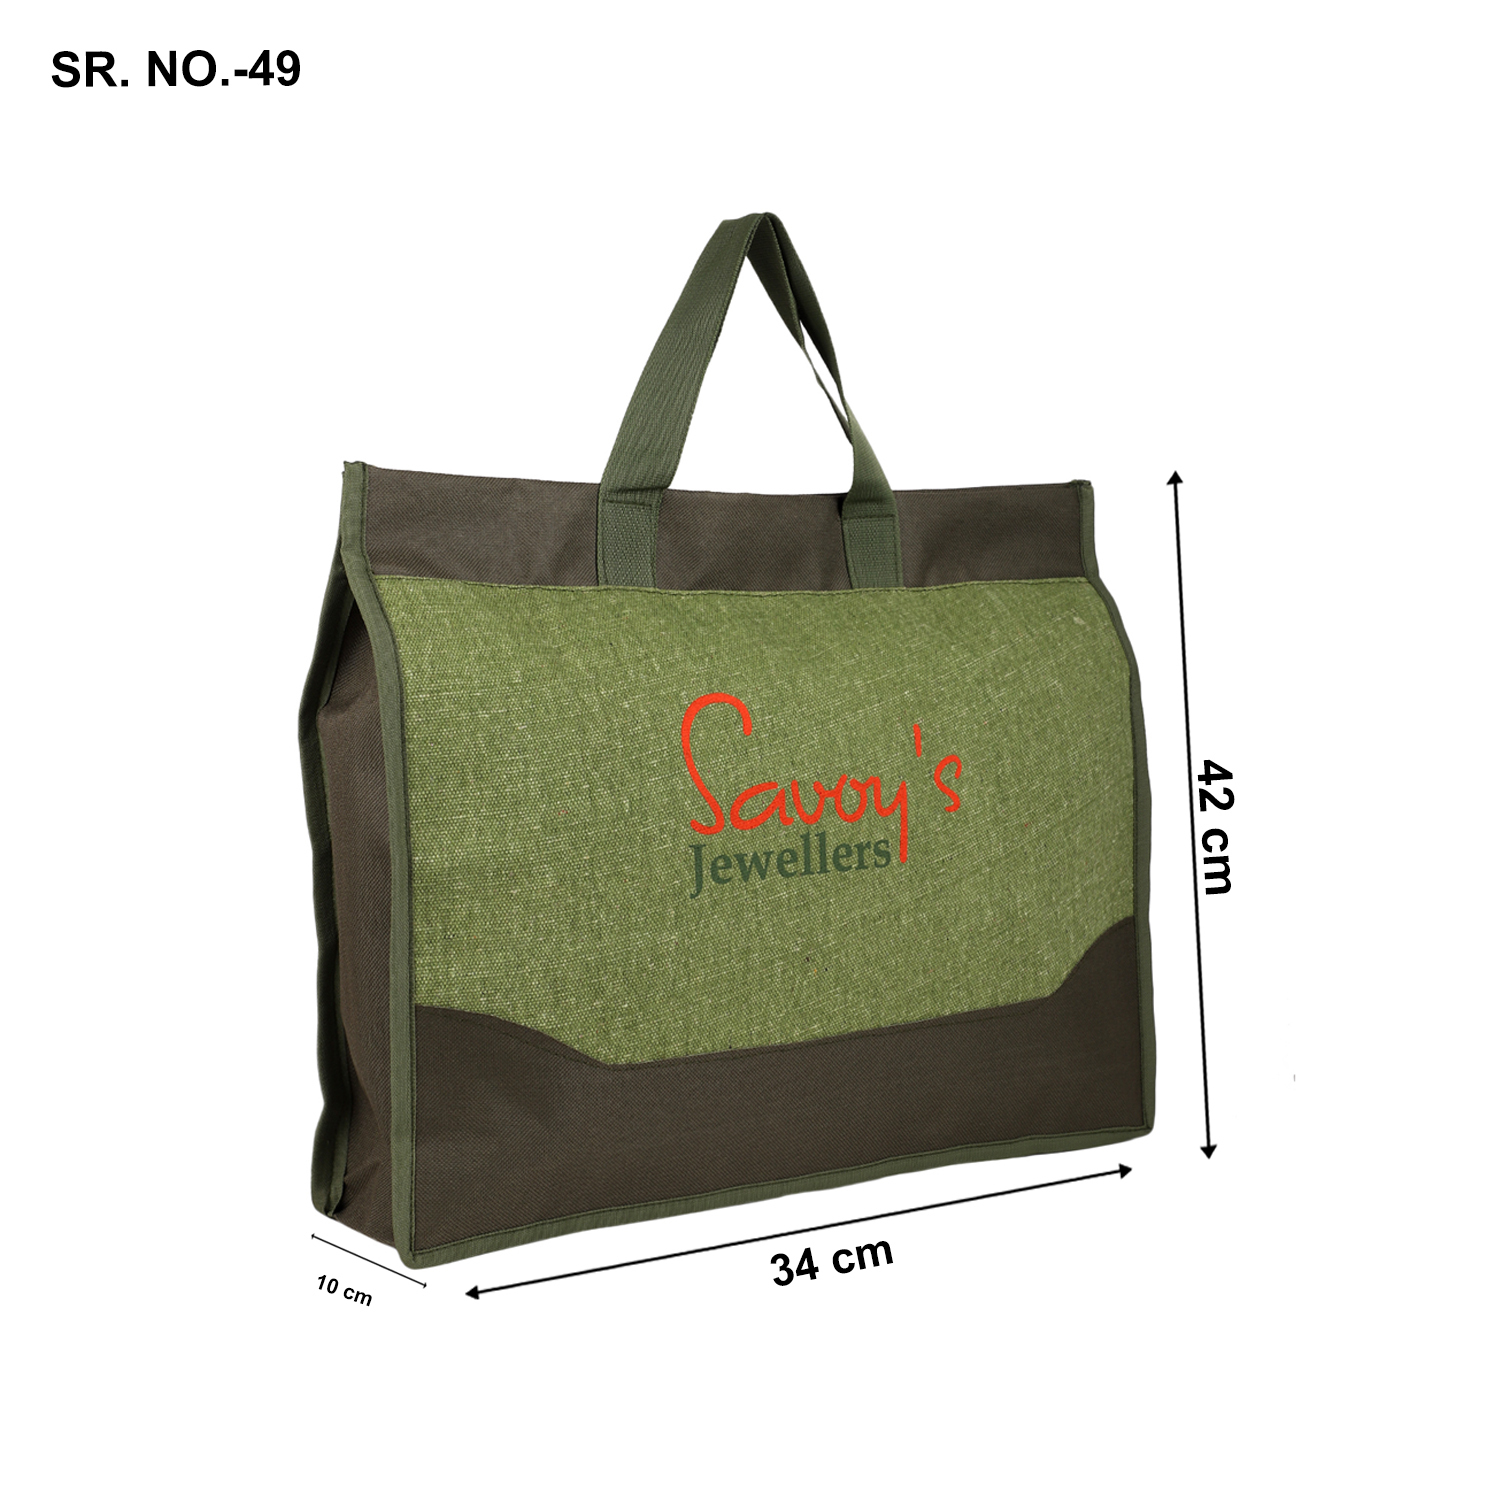 Promotional Shopping Thaila / Carry bag